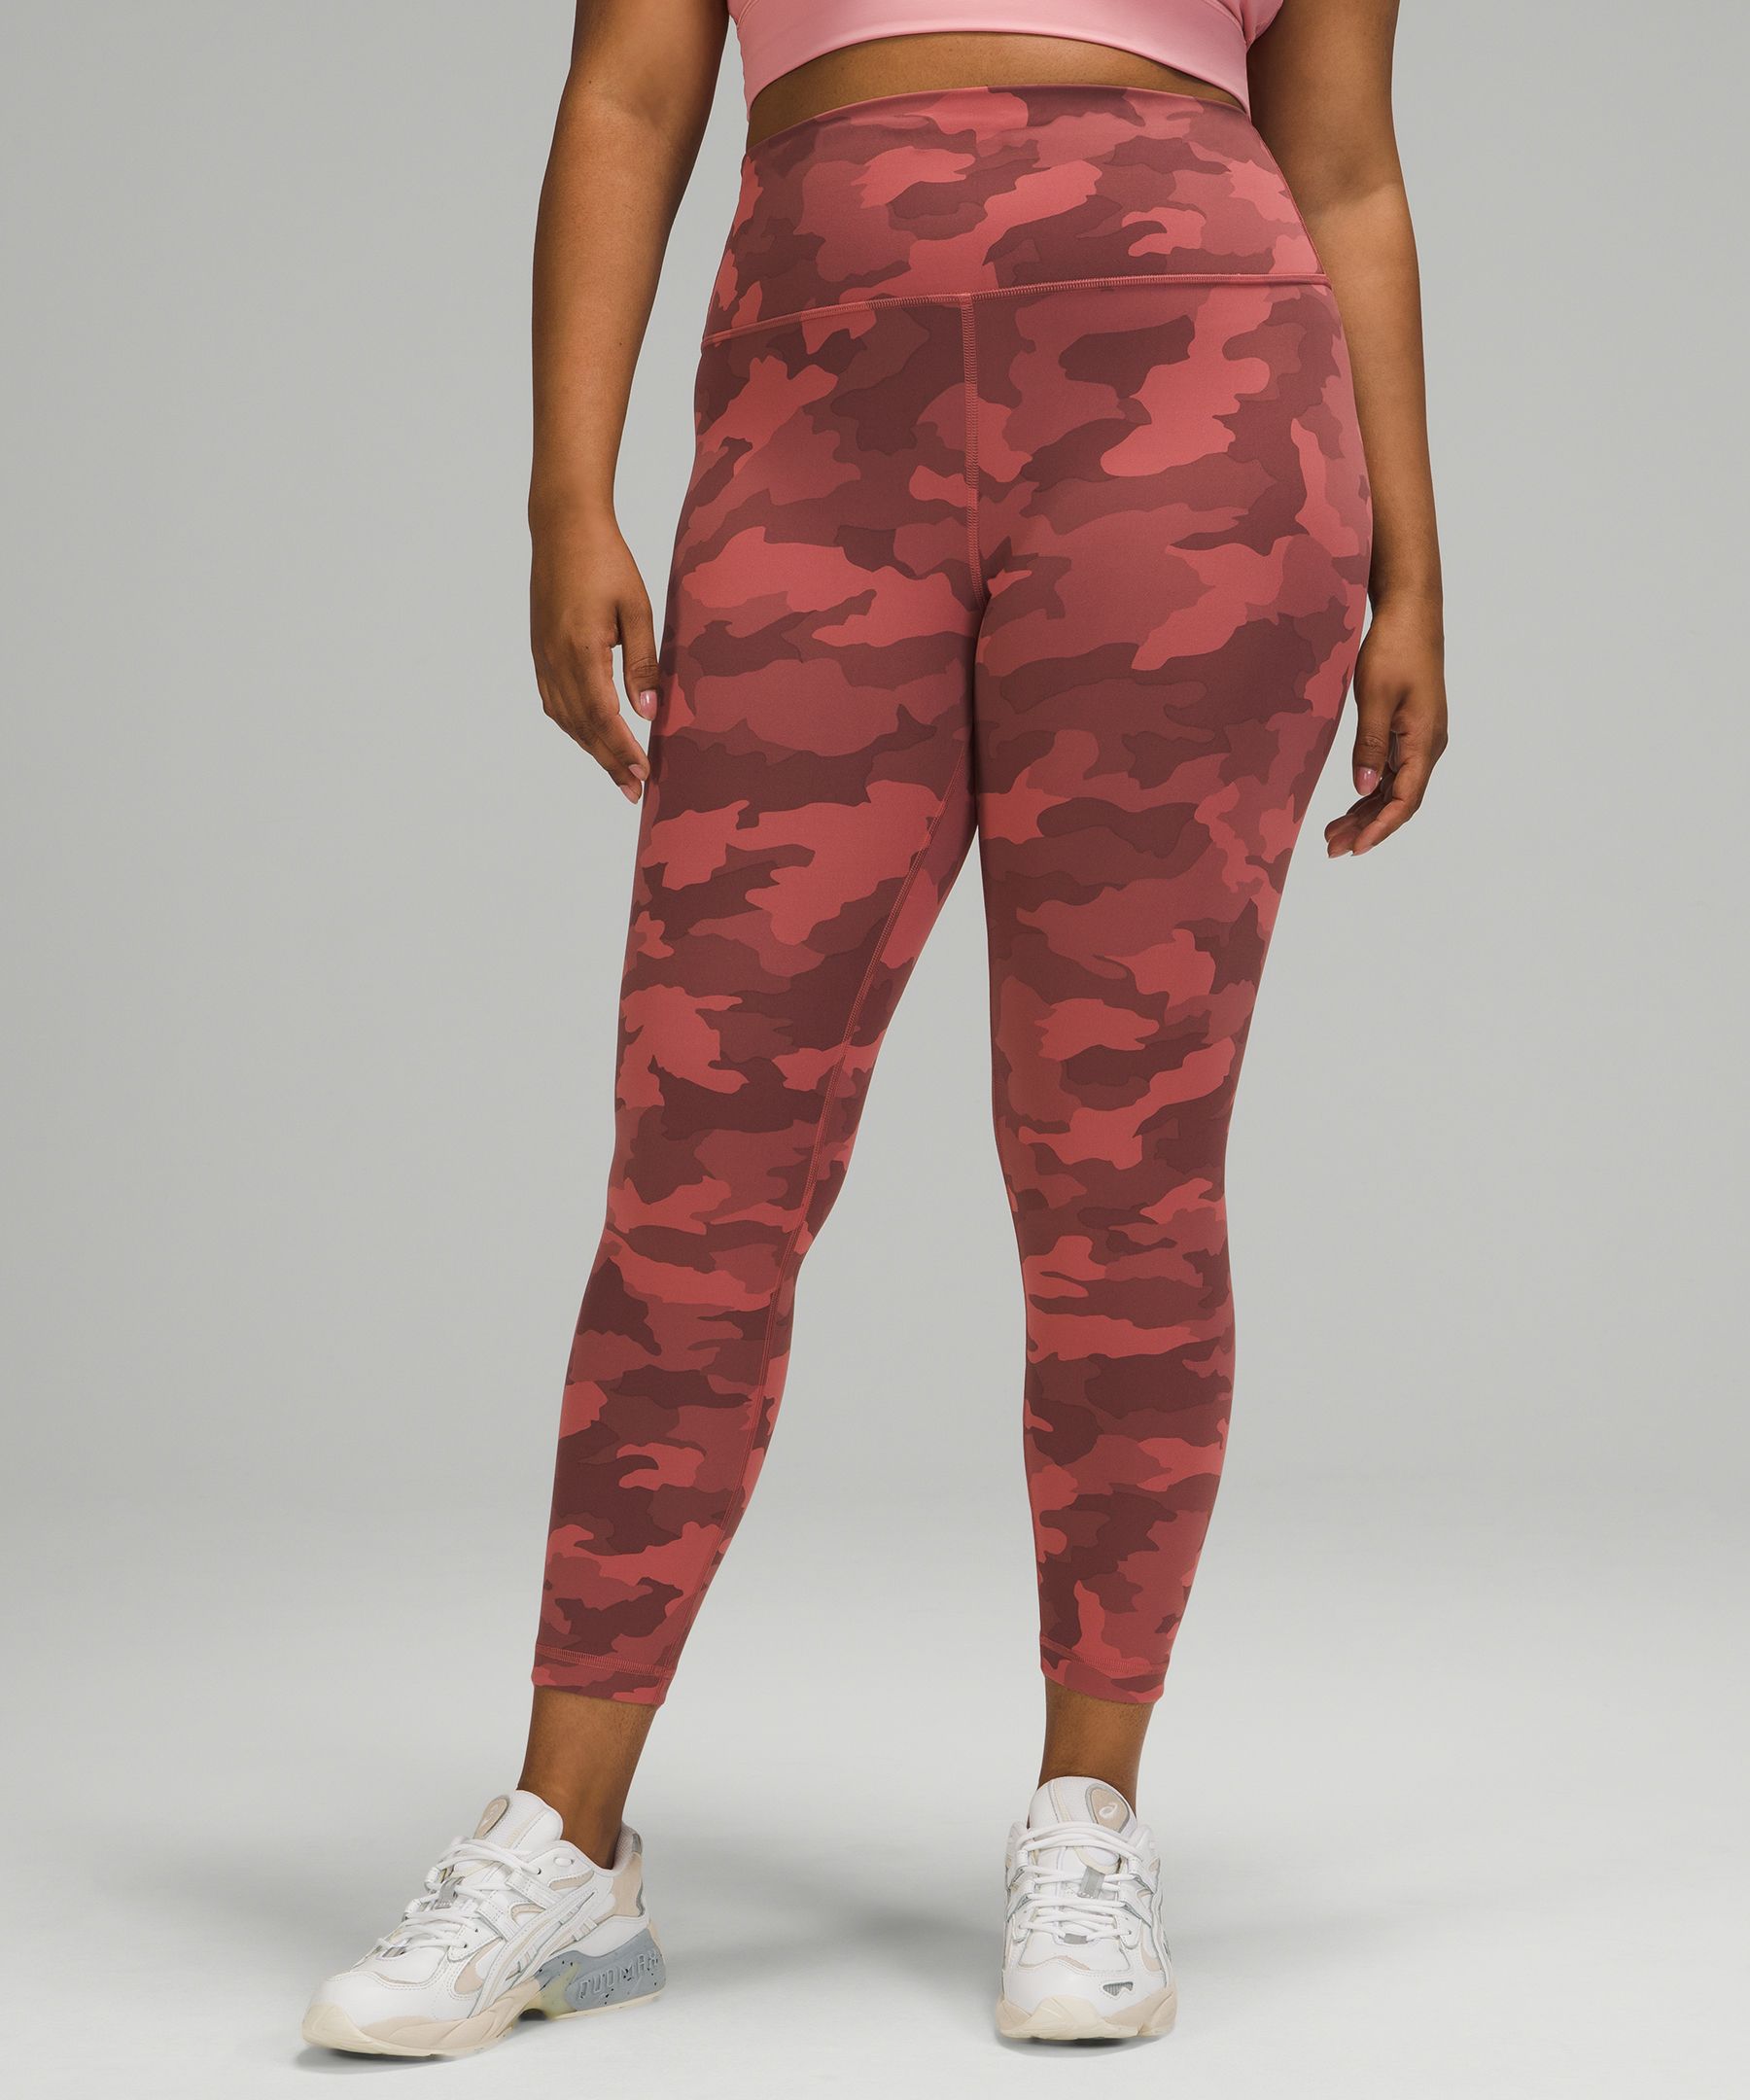 Lululemon Wunder Train High-rise Tight 25" In Printed